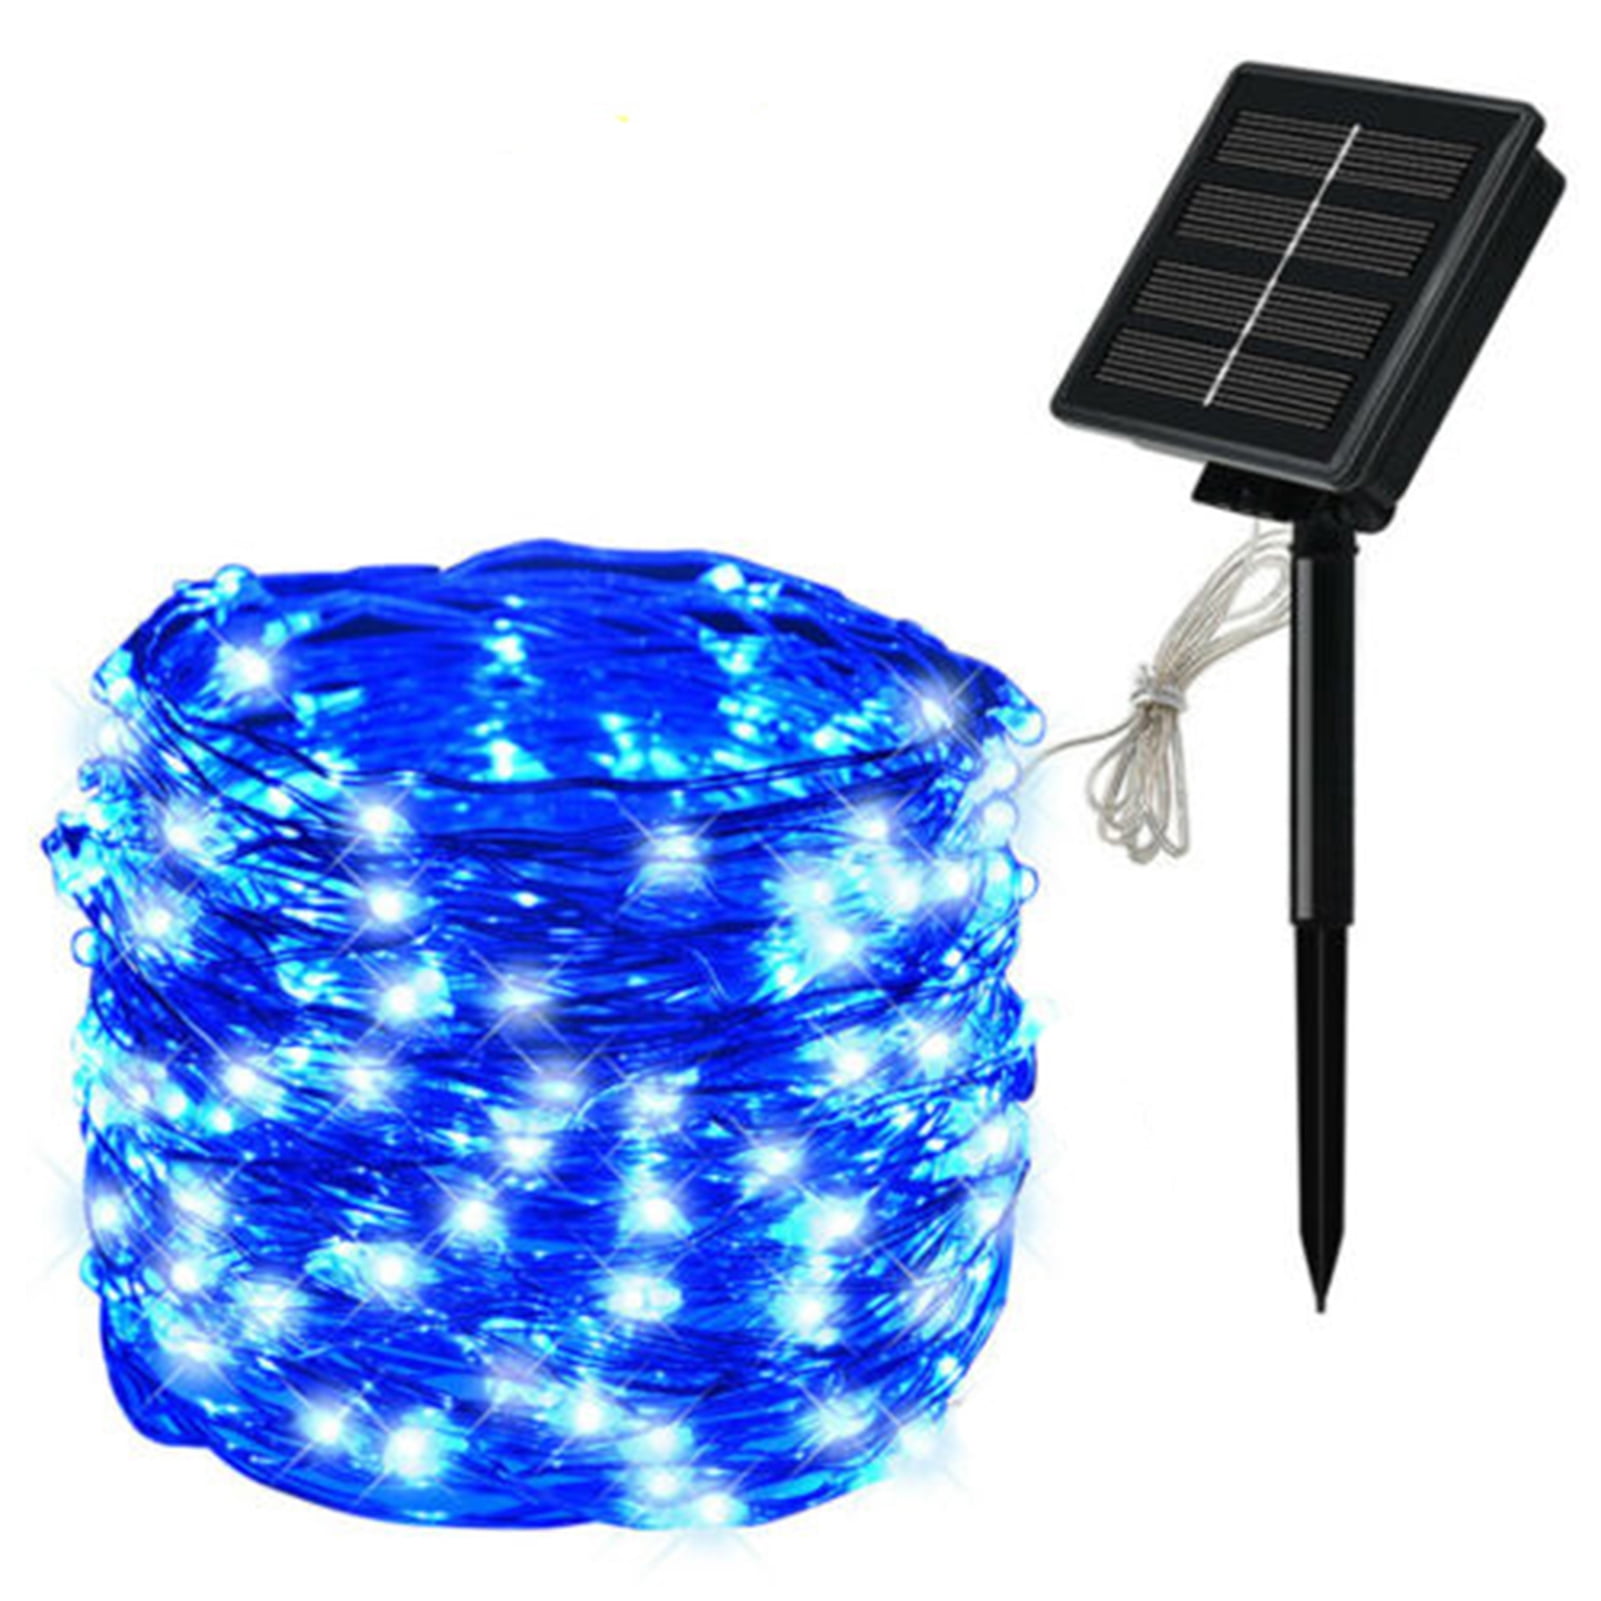 Details about   300/200/100 LED String Lights Garden Outdoor Copper Wire Fairy Lights+Remote US 